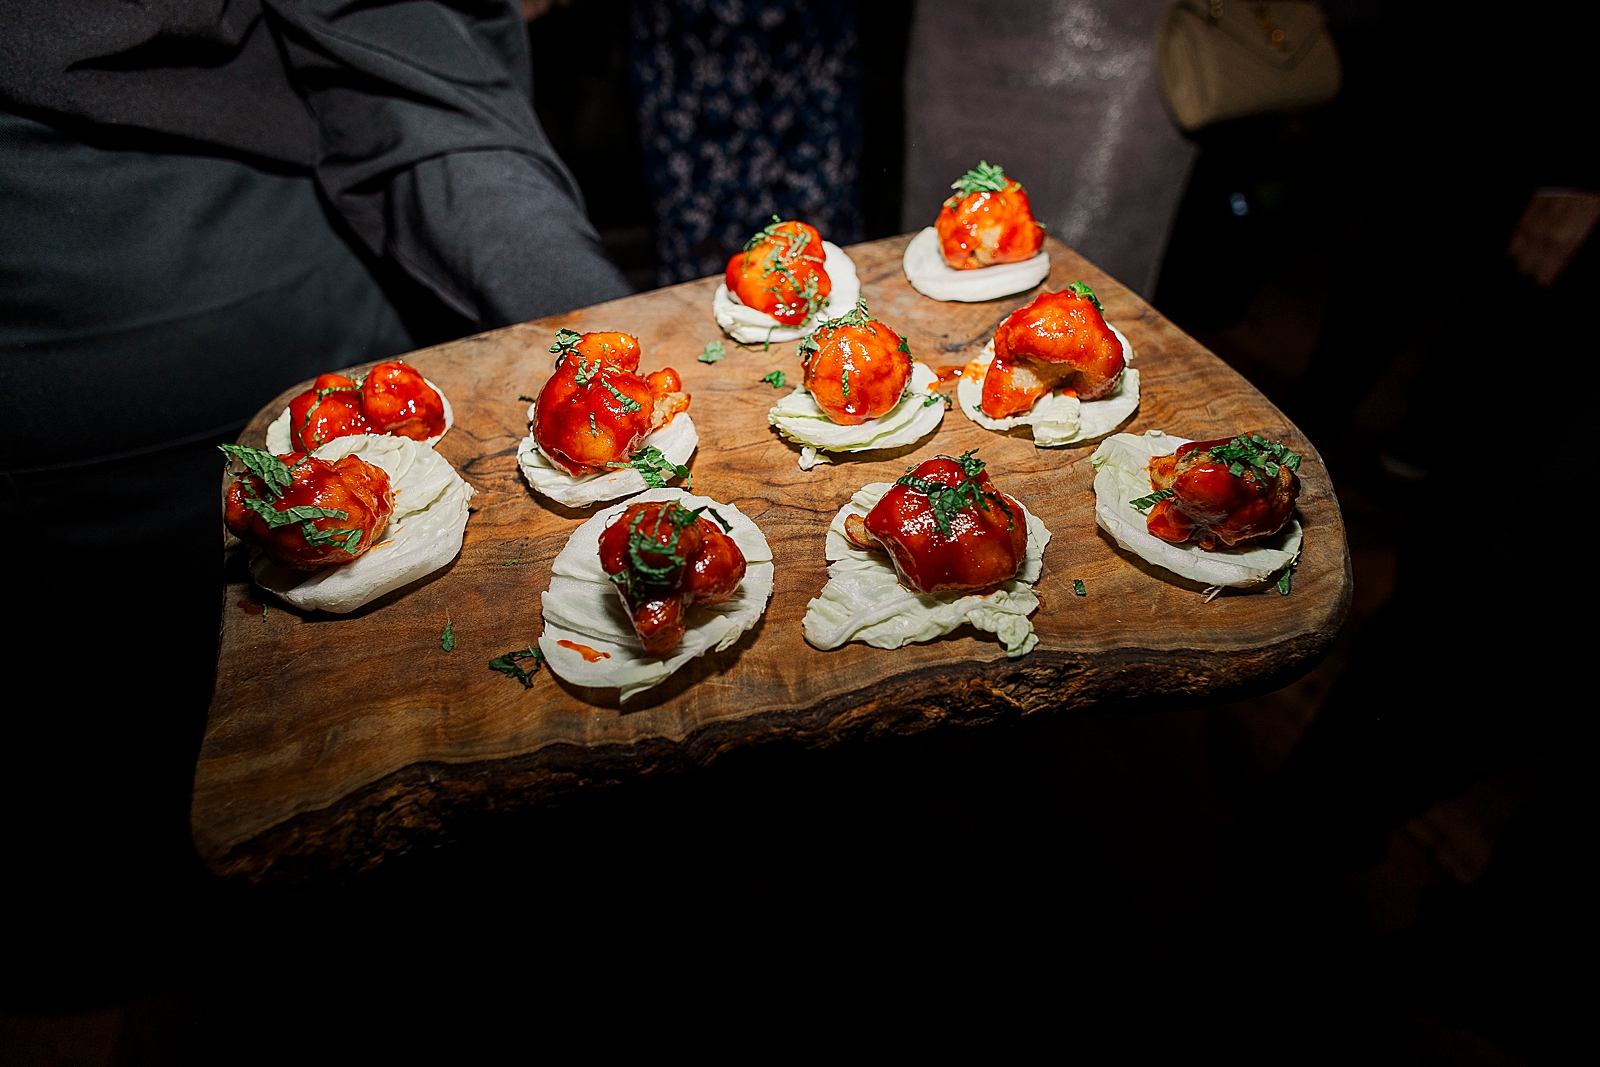 Shot of hors d'oeuvres being presented on a tray.